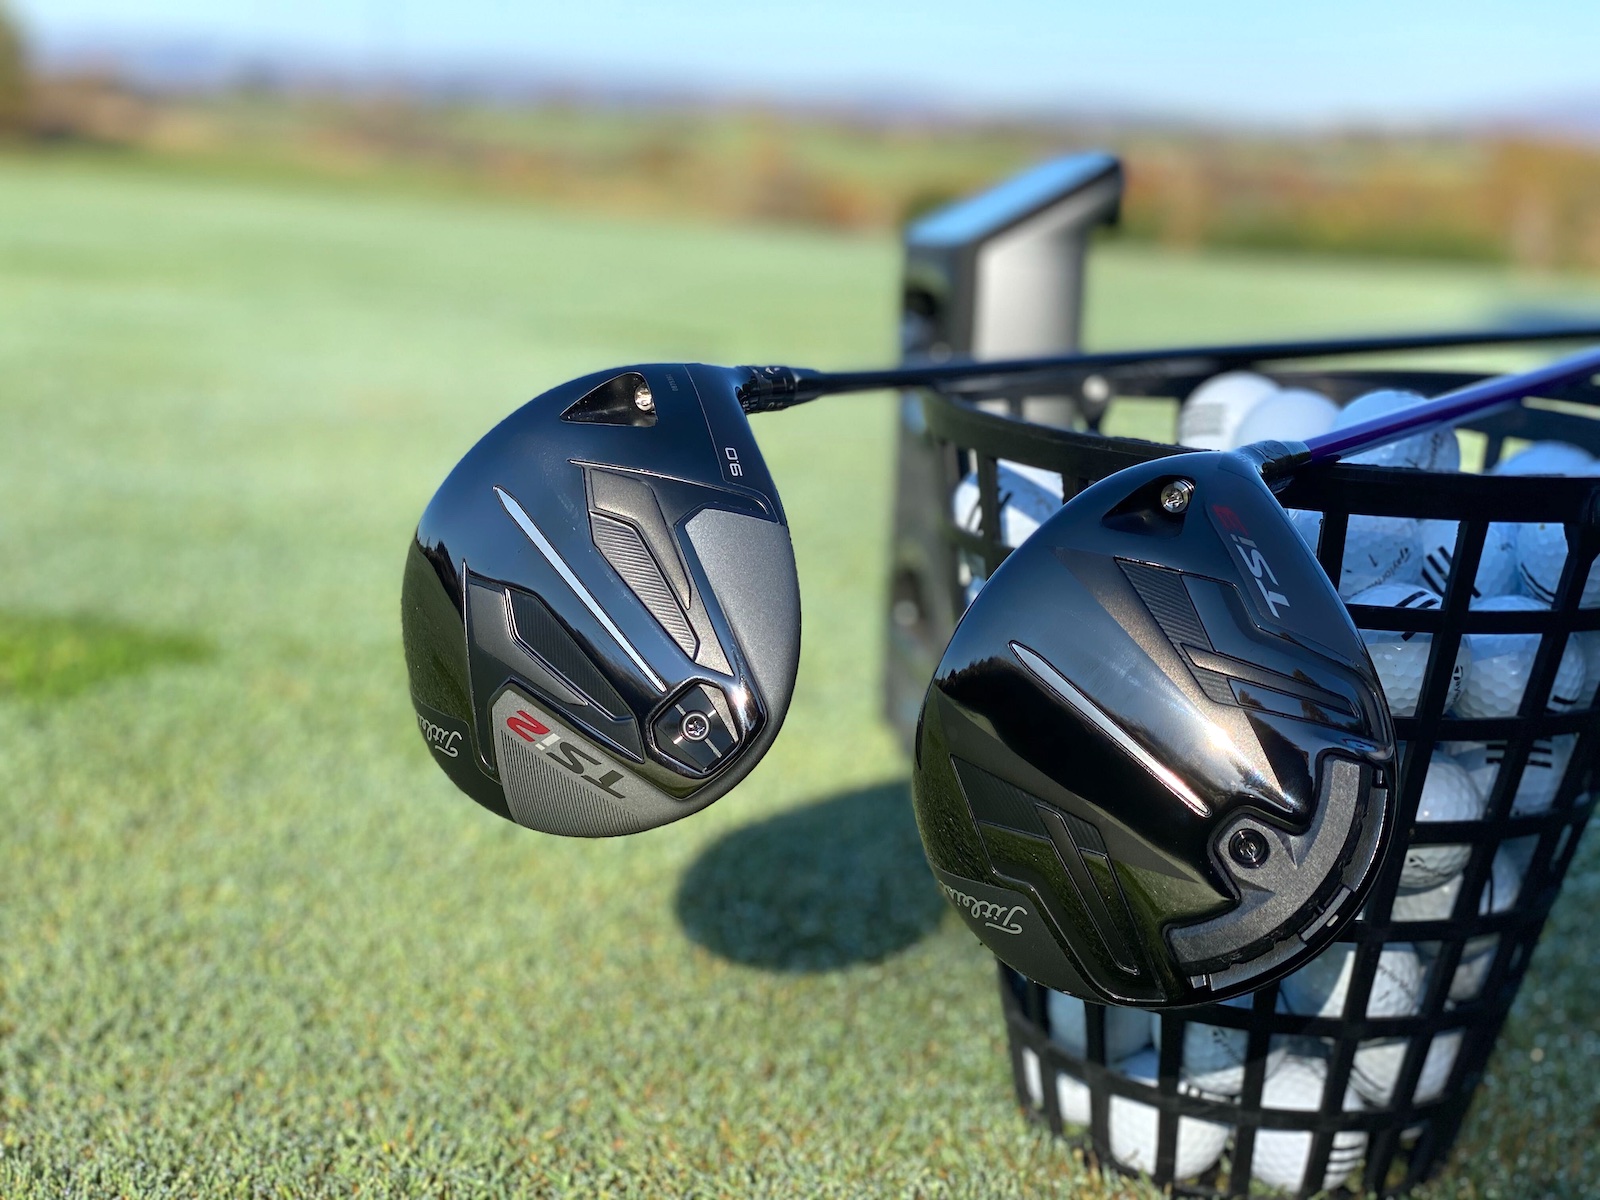 titleist tsi2 driver review